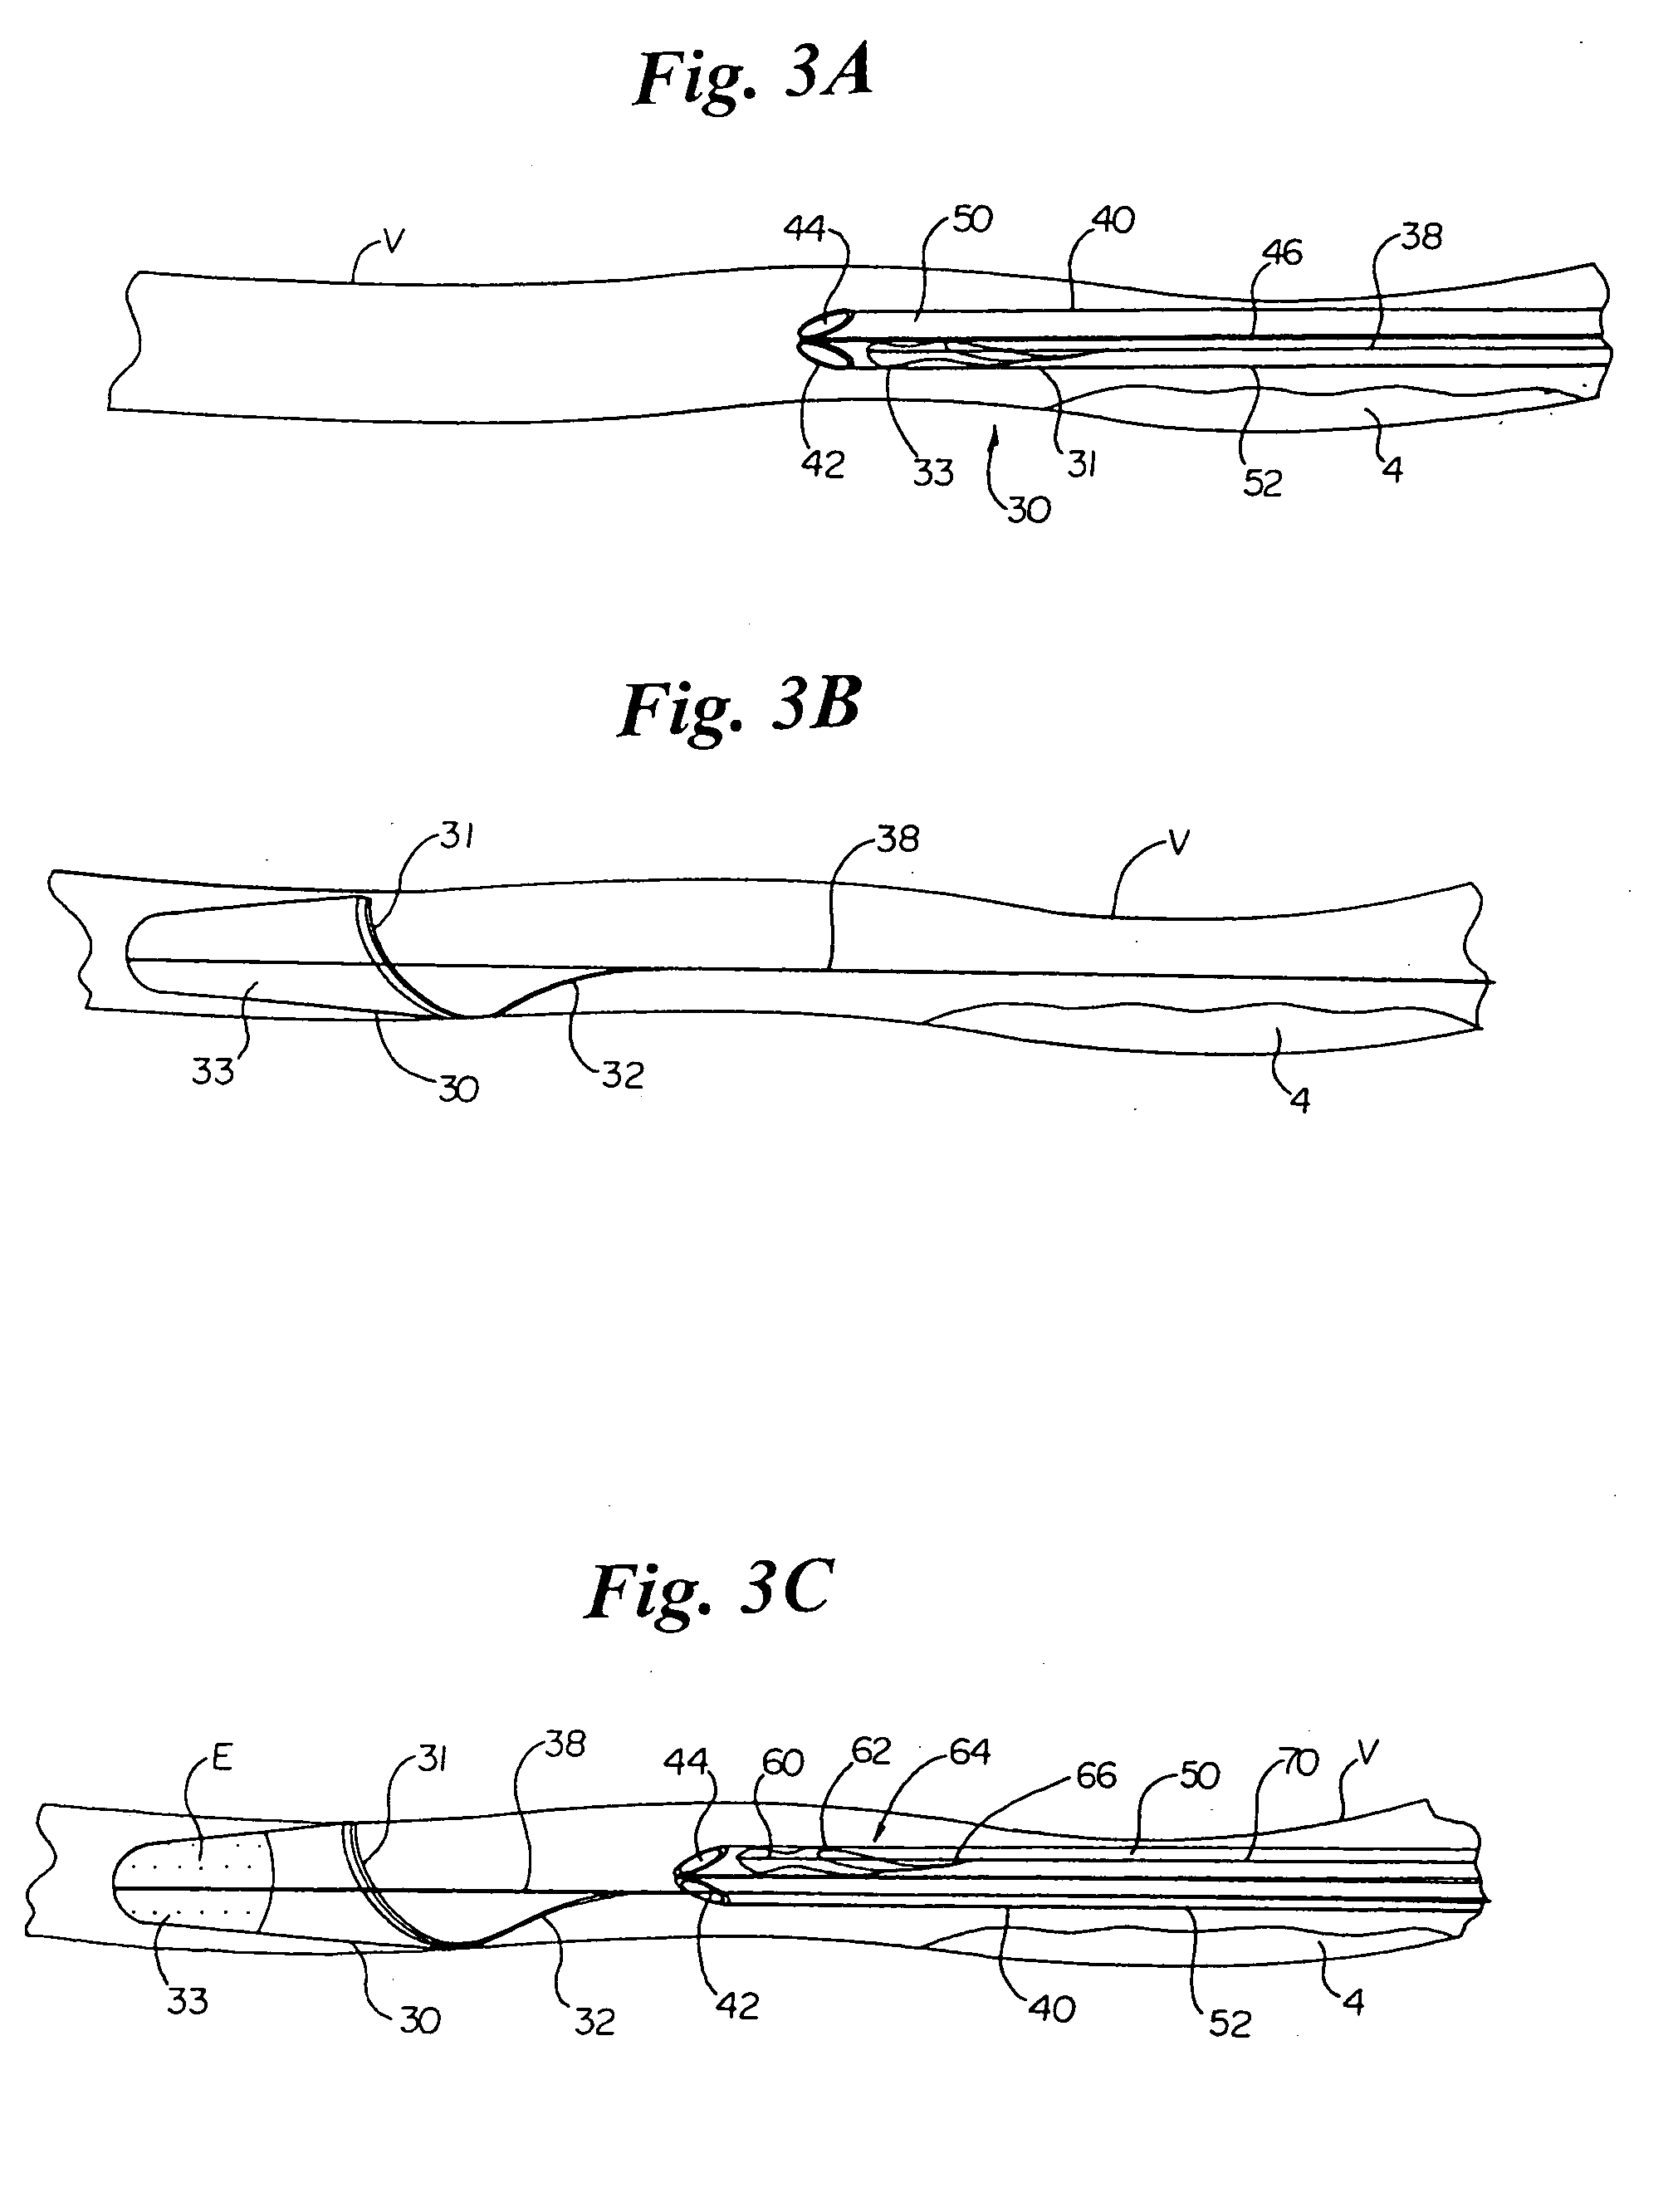 Vascular embolic filter exchange devices and methods of use thereof